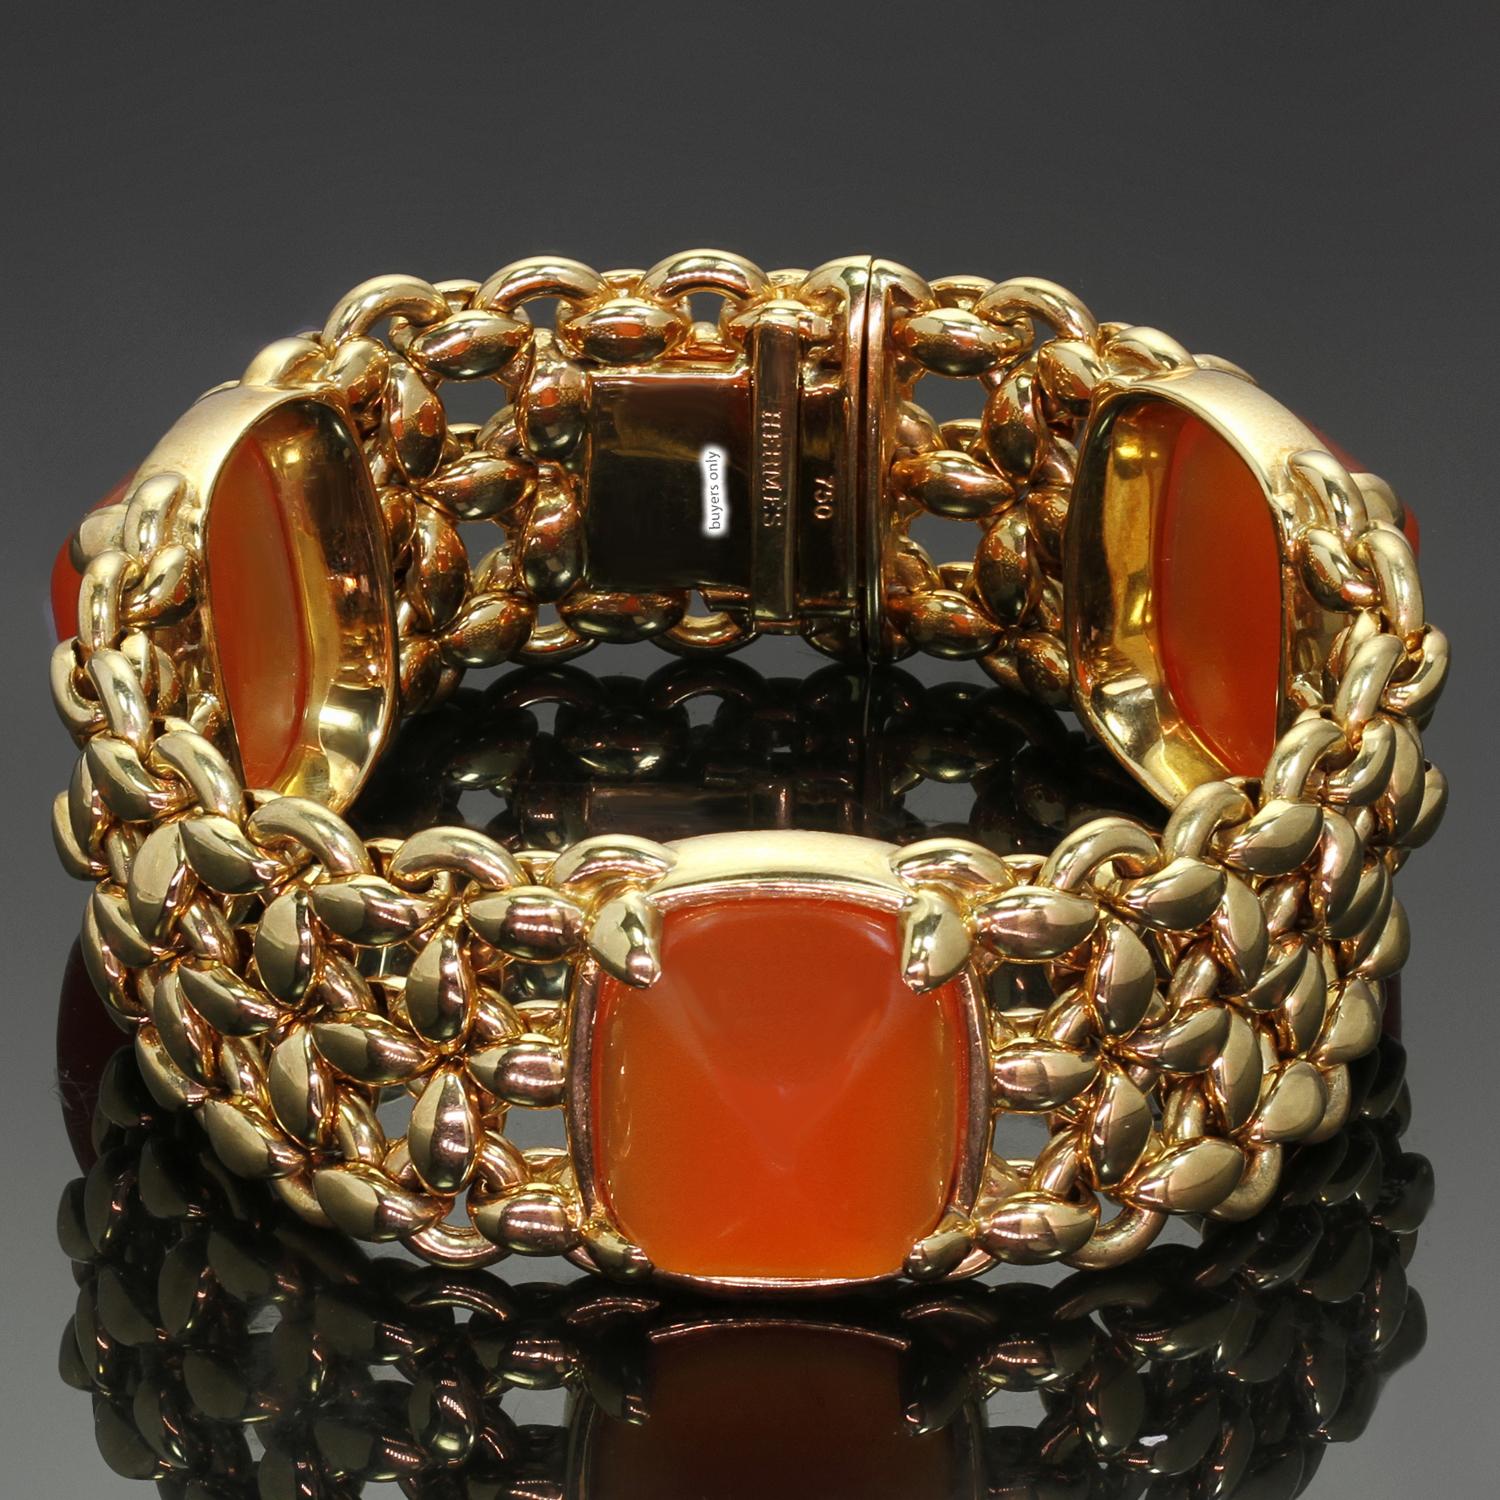 This fabulous Hermes link bracelet is crafted in 18k yellow gold and set with 3 red cornelian gemstones. Made in France circa 1980s. Measurements: 0.86